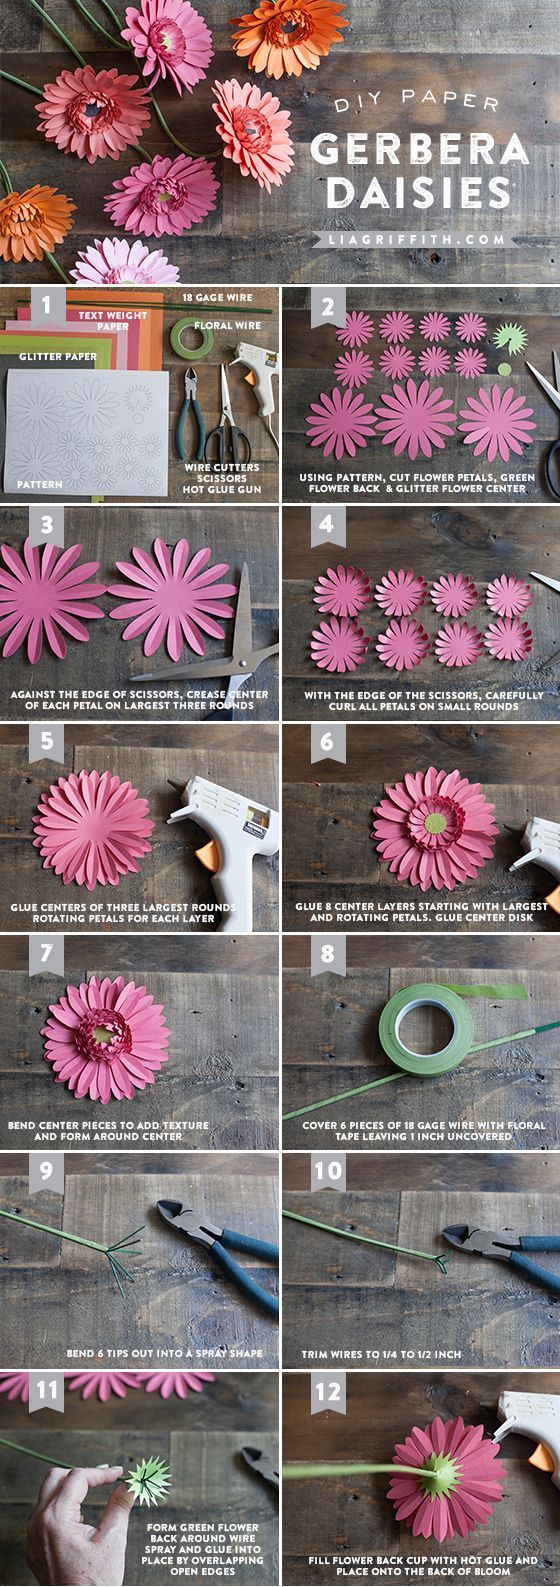 Make these gorgeous paper Gerbera daisies with this easy tutorial @LiaGriffith.com